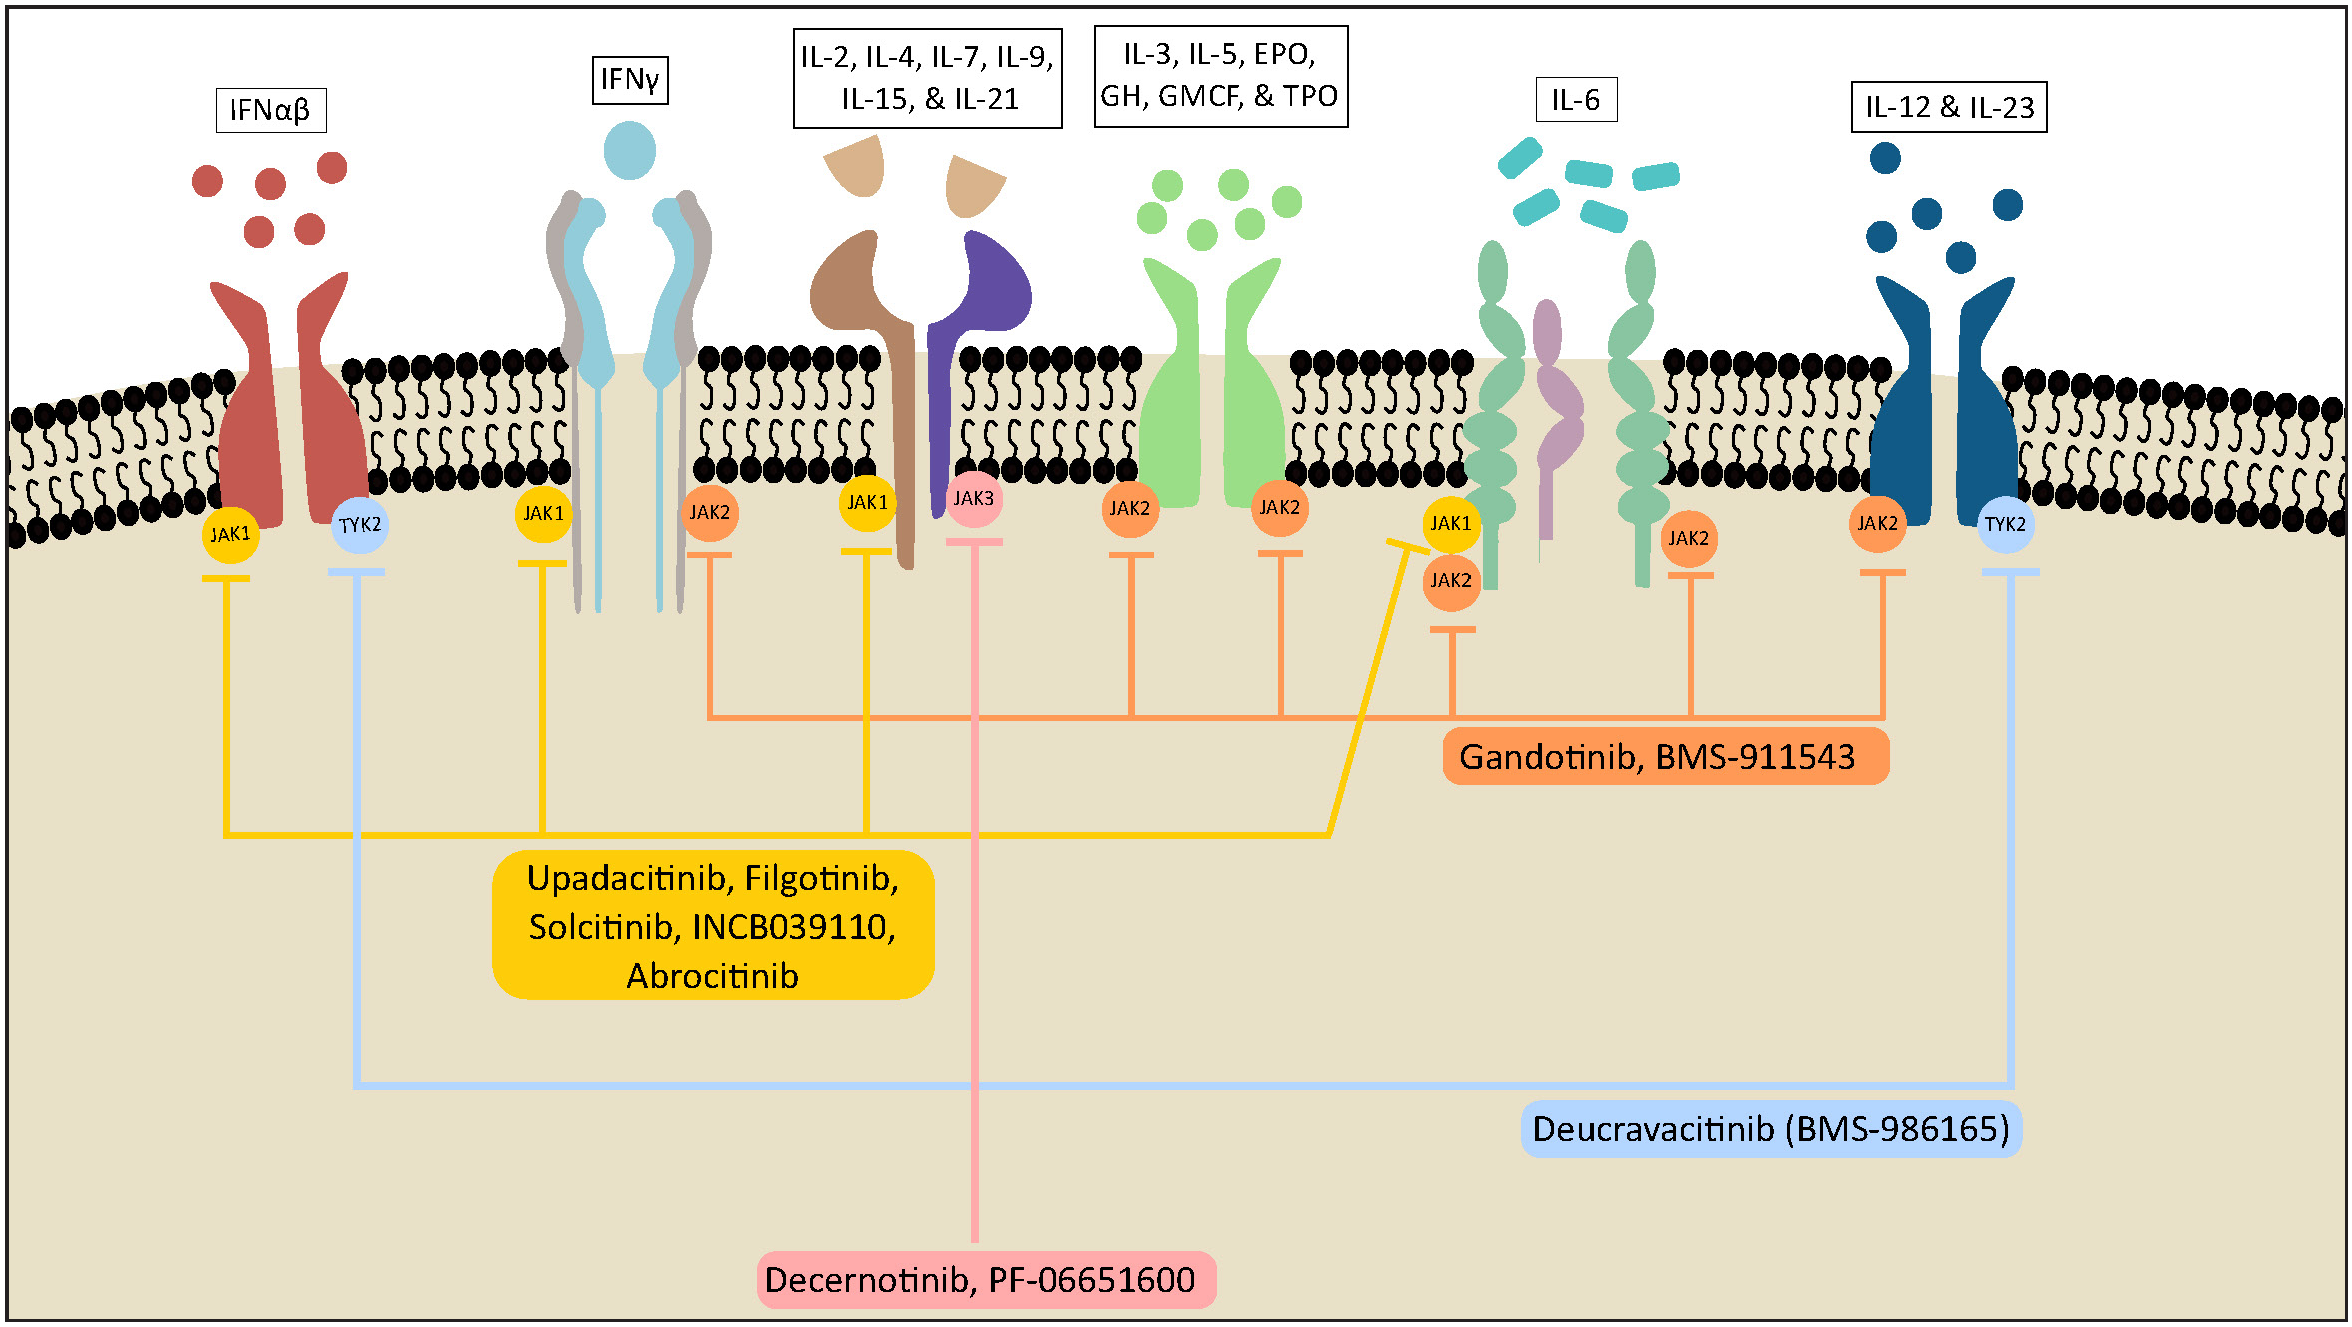 Role of Janus kinase–signal transducers and activators of transcription (JAK-STAT) signalling and mechanism of action of Janus kinase inhibitors in various autoimmune diseases. As illustrated in Figure 2, various inflammatory cytokines, including interferons, interleukins, interferon-like cytokines, growth factors and colony-stimulating factors, bind to their specific receptors resulting in the activation of specific JAK-STAT pathways. Specifically, IL-2, IL-3, IL-4, IL-5, IL-6, IL-7, IL-9, IL-12, IL-15, IL-21 and IL-23 participate in JAK STAT activation and lead to immune responses as discussed in Table 1 thus contributing to the pathophysiology of various autoimmune diseases. It also demonstrates how the newer Janus kinase inhibitors block specific Janus kinase molecules leading to targeted disease control.